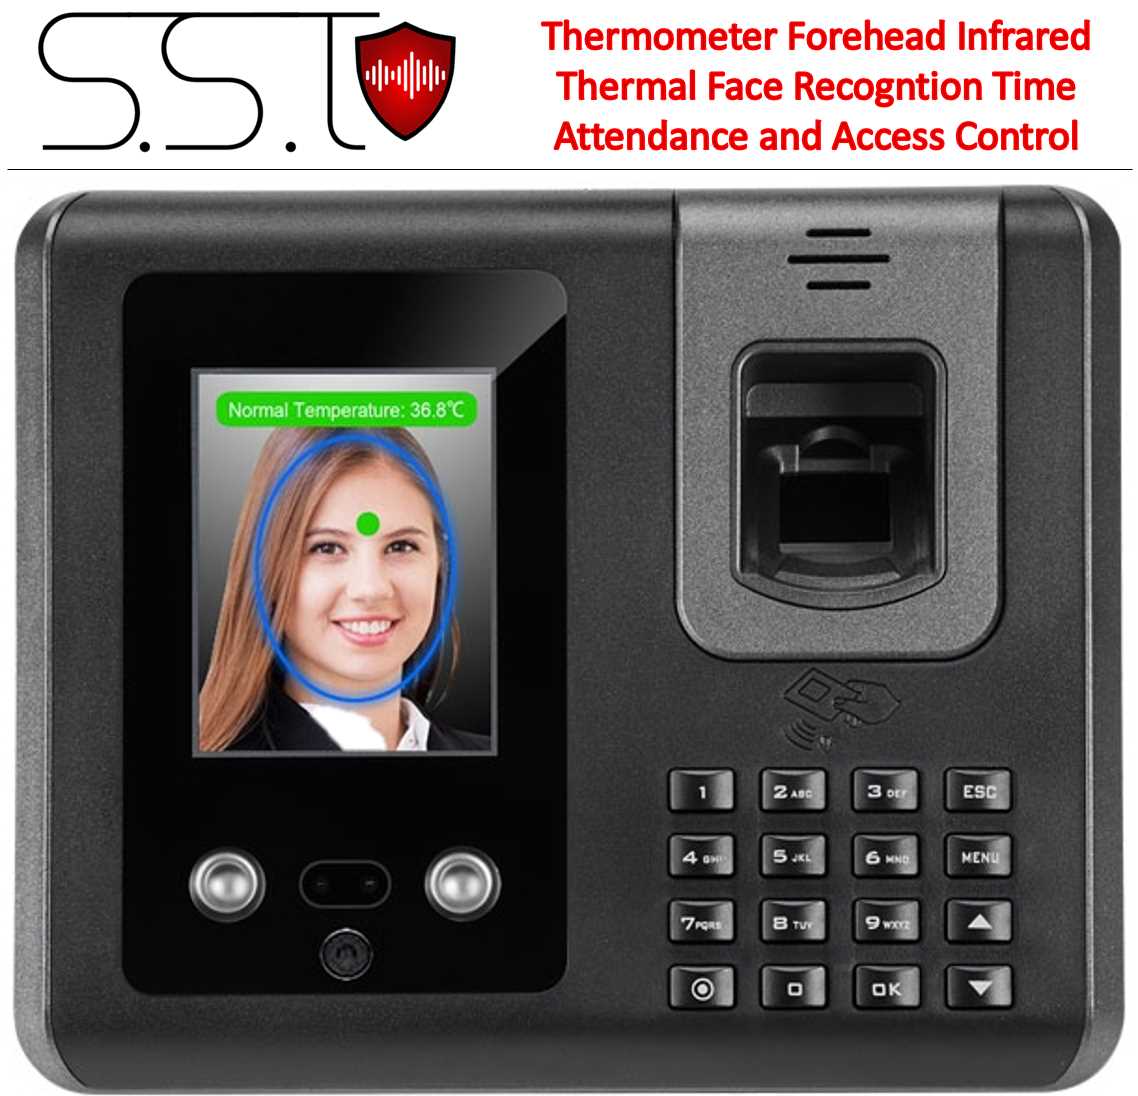 Infrared Thermal Face Recognition and Biometric Access Control System For Sale, Sound And Safety Technologies, SST , S&ST , SSTechnologies Sri Lanka.